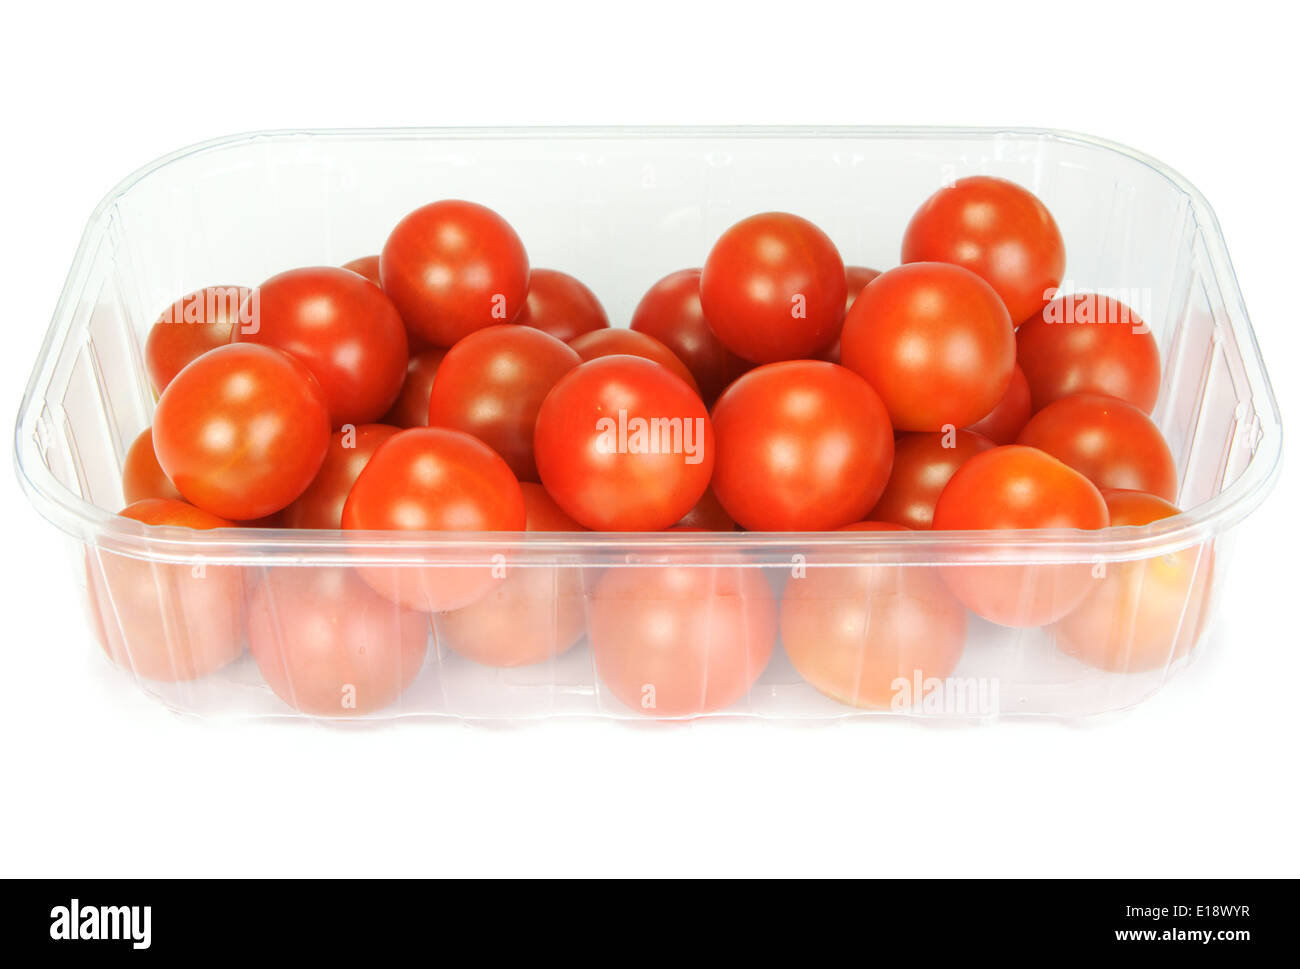 Cherry tomatoes in a plastic container on white background Stock Photo